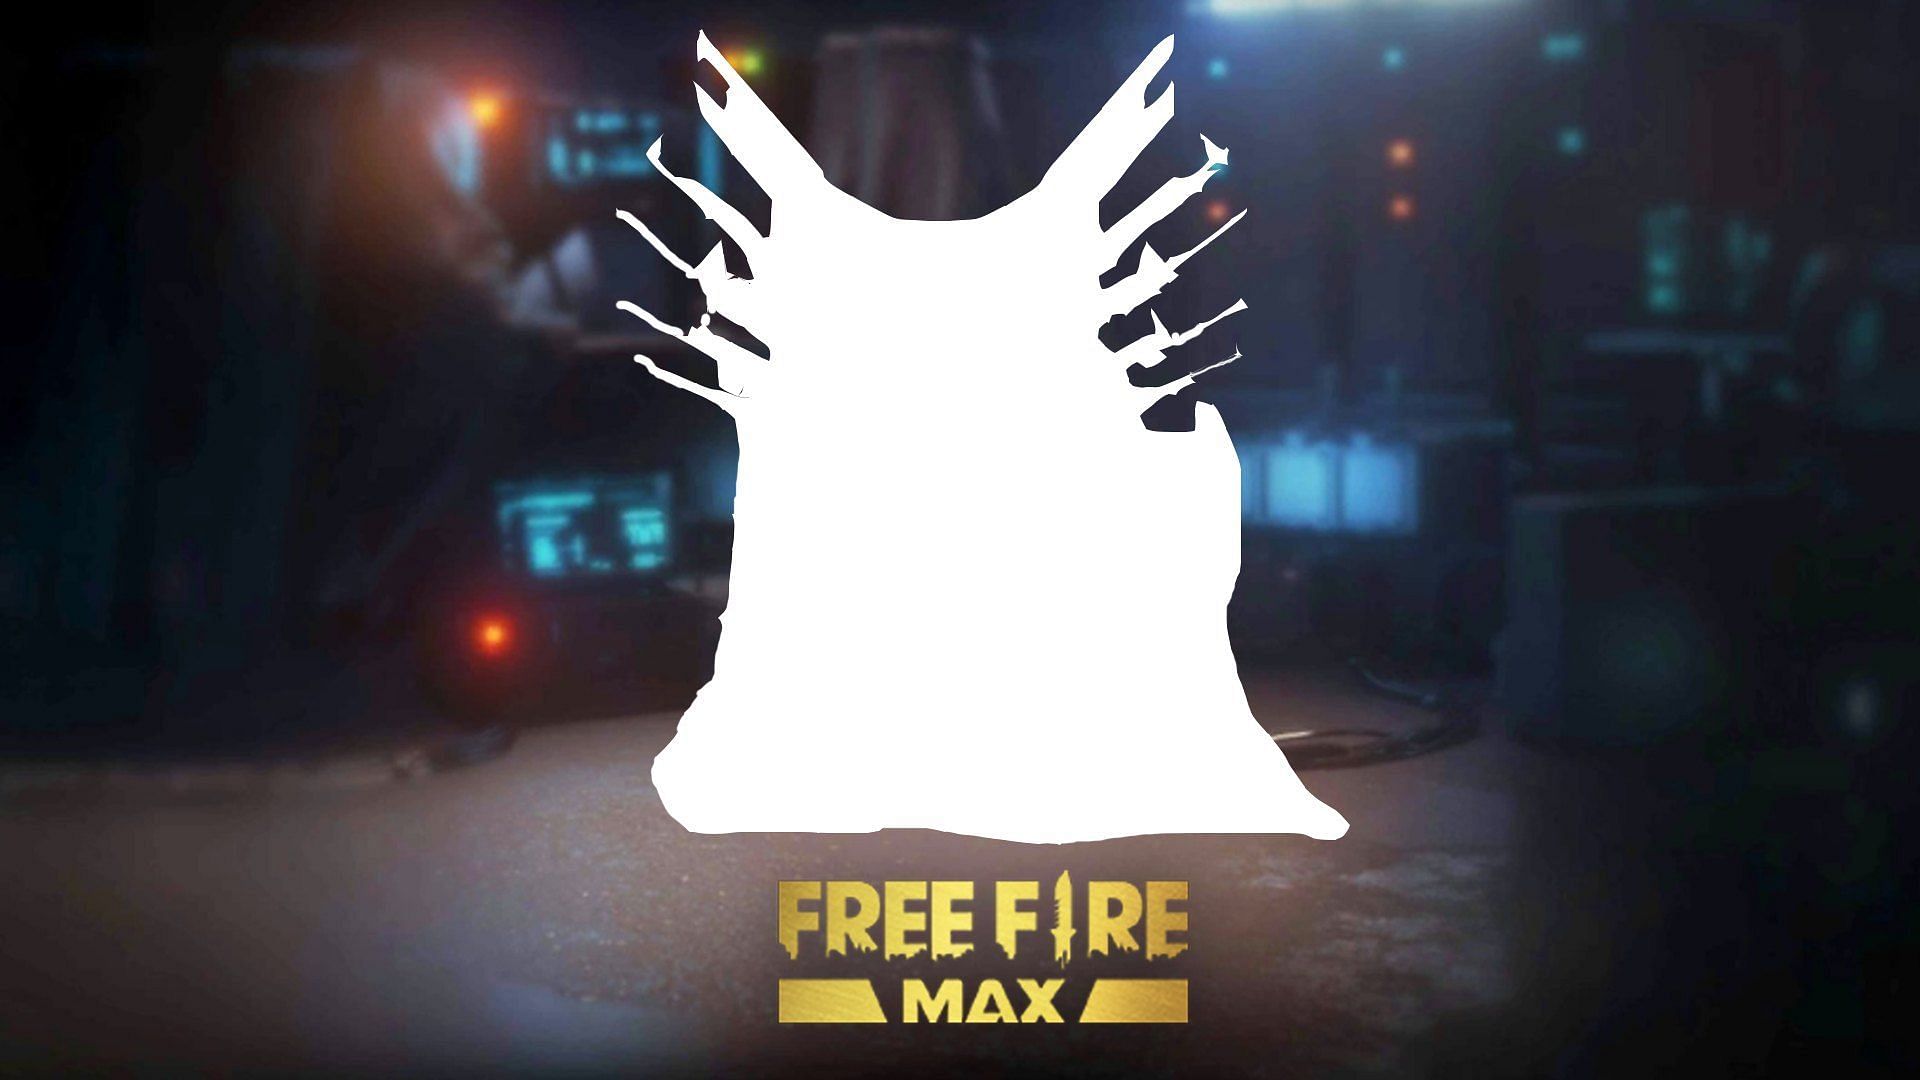 An array of the legendary emotes in Free Fire MAX (Image via Sportskeeda)